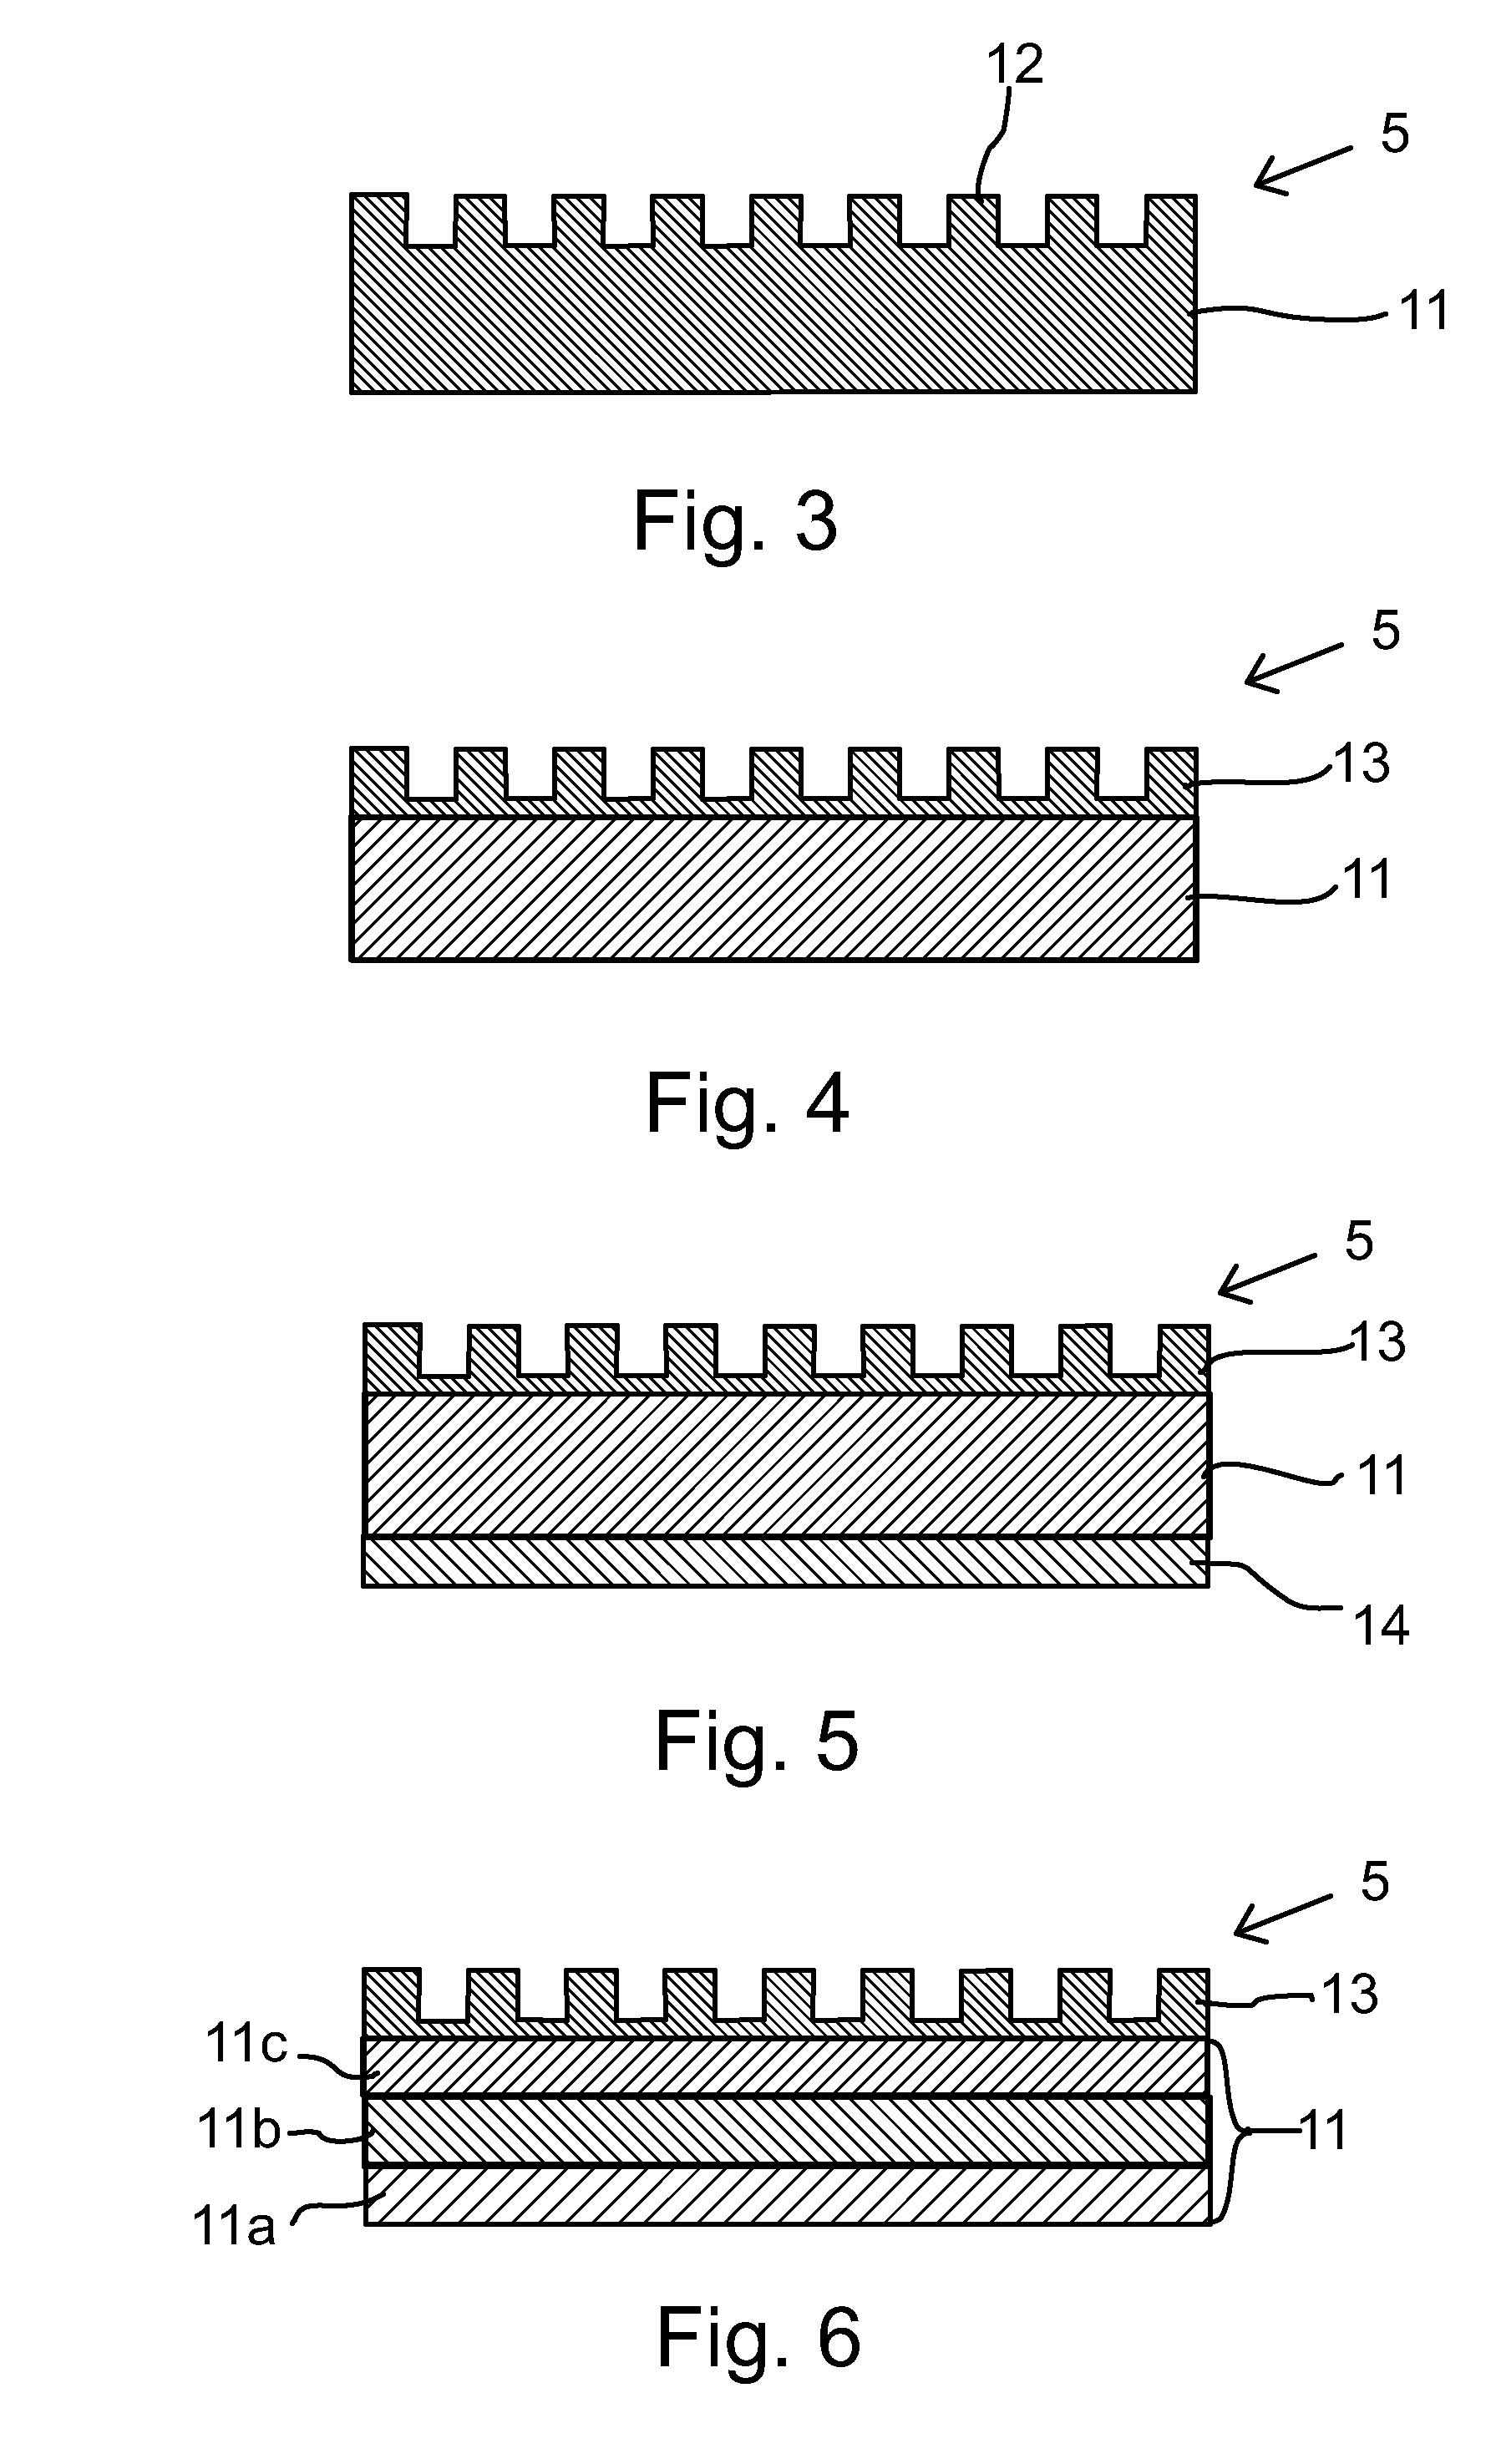 Method for producing micro- or nanostructures in polymeric film materials